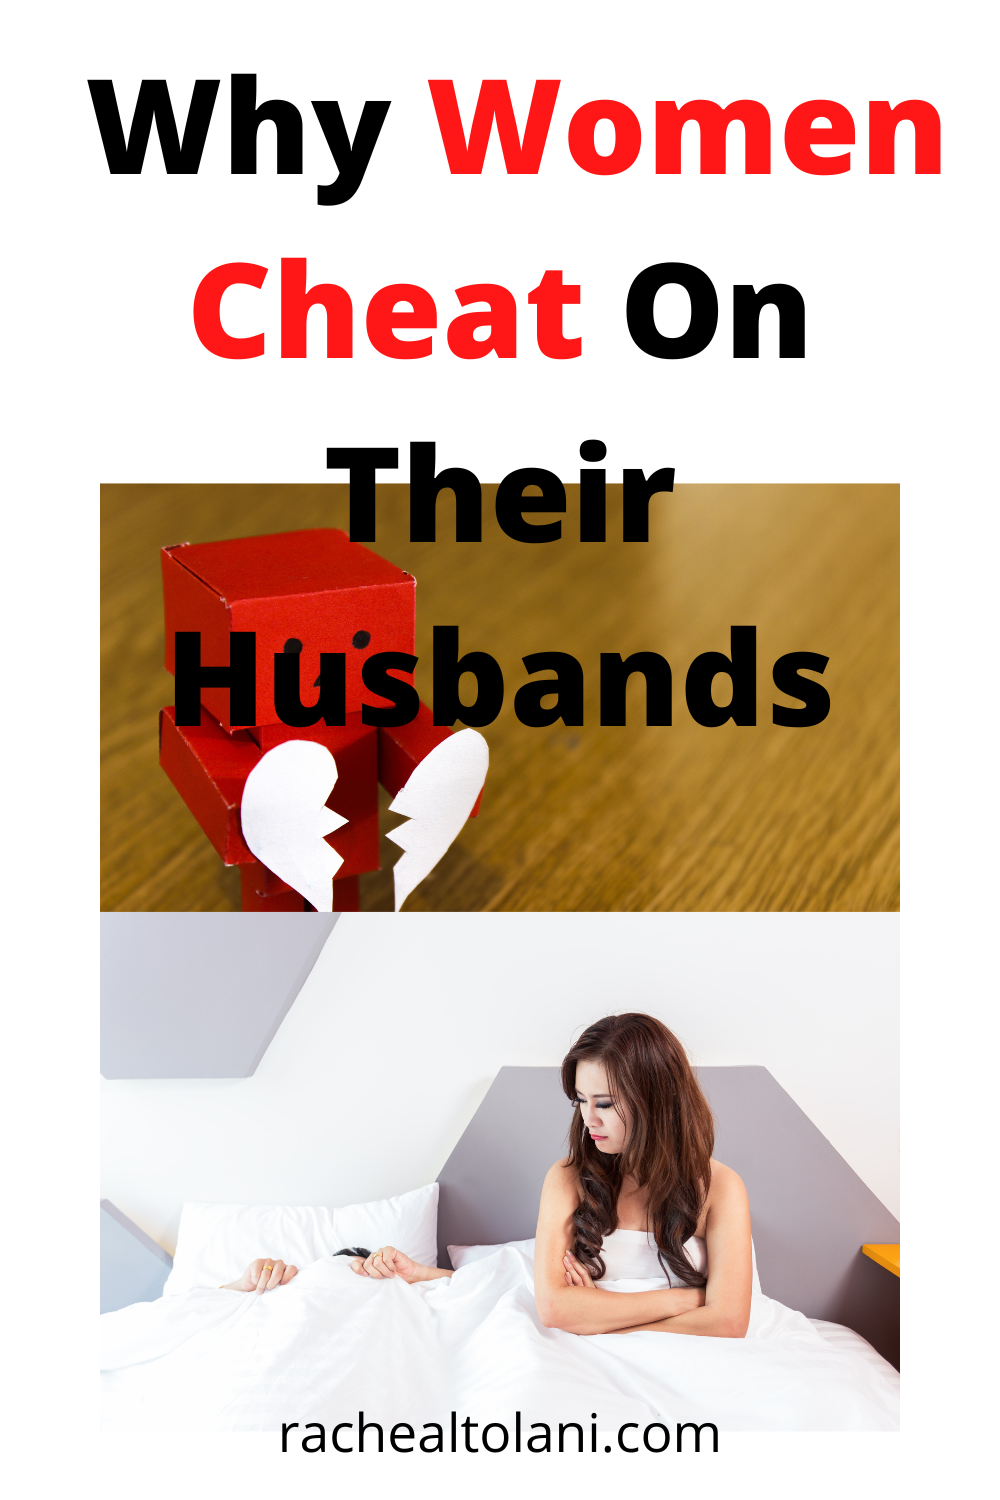 8 Reasons Why Women Cheat On Their Men